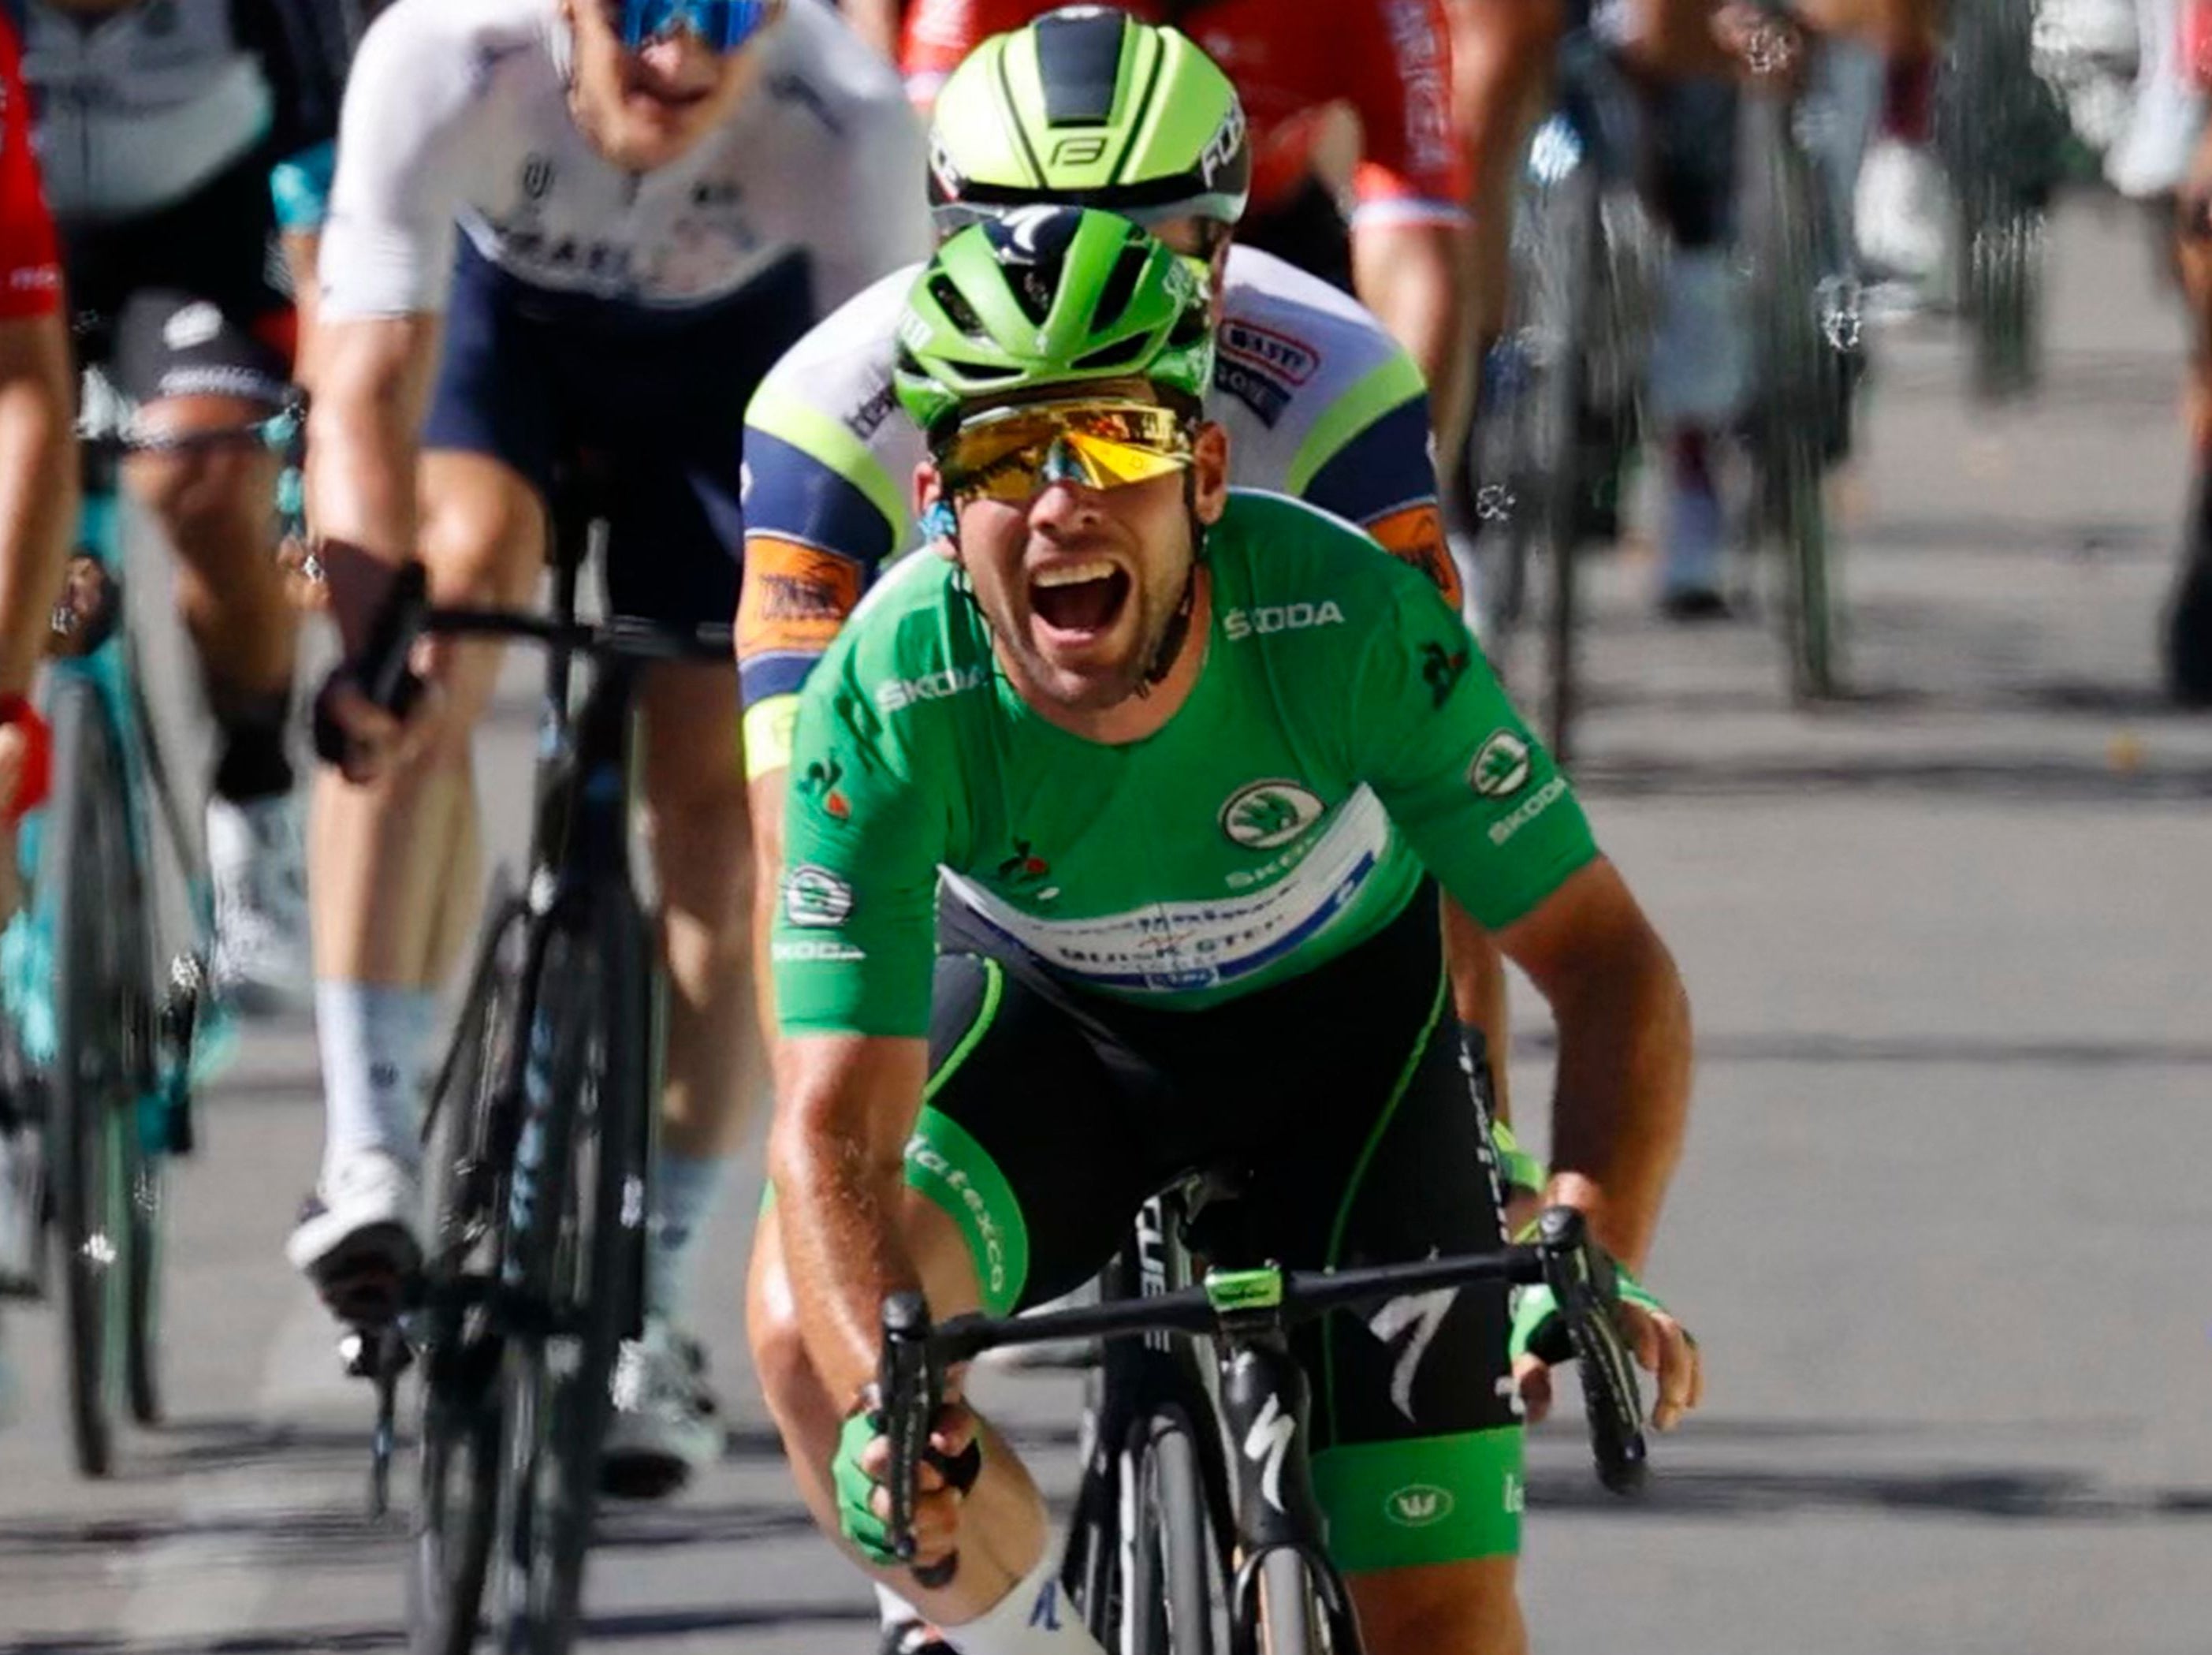 Mark Cavendish crosses the line as he wins stage 13